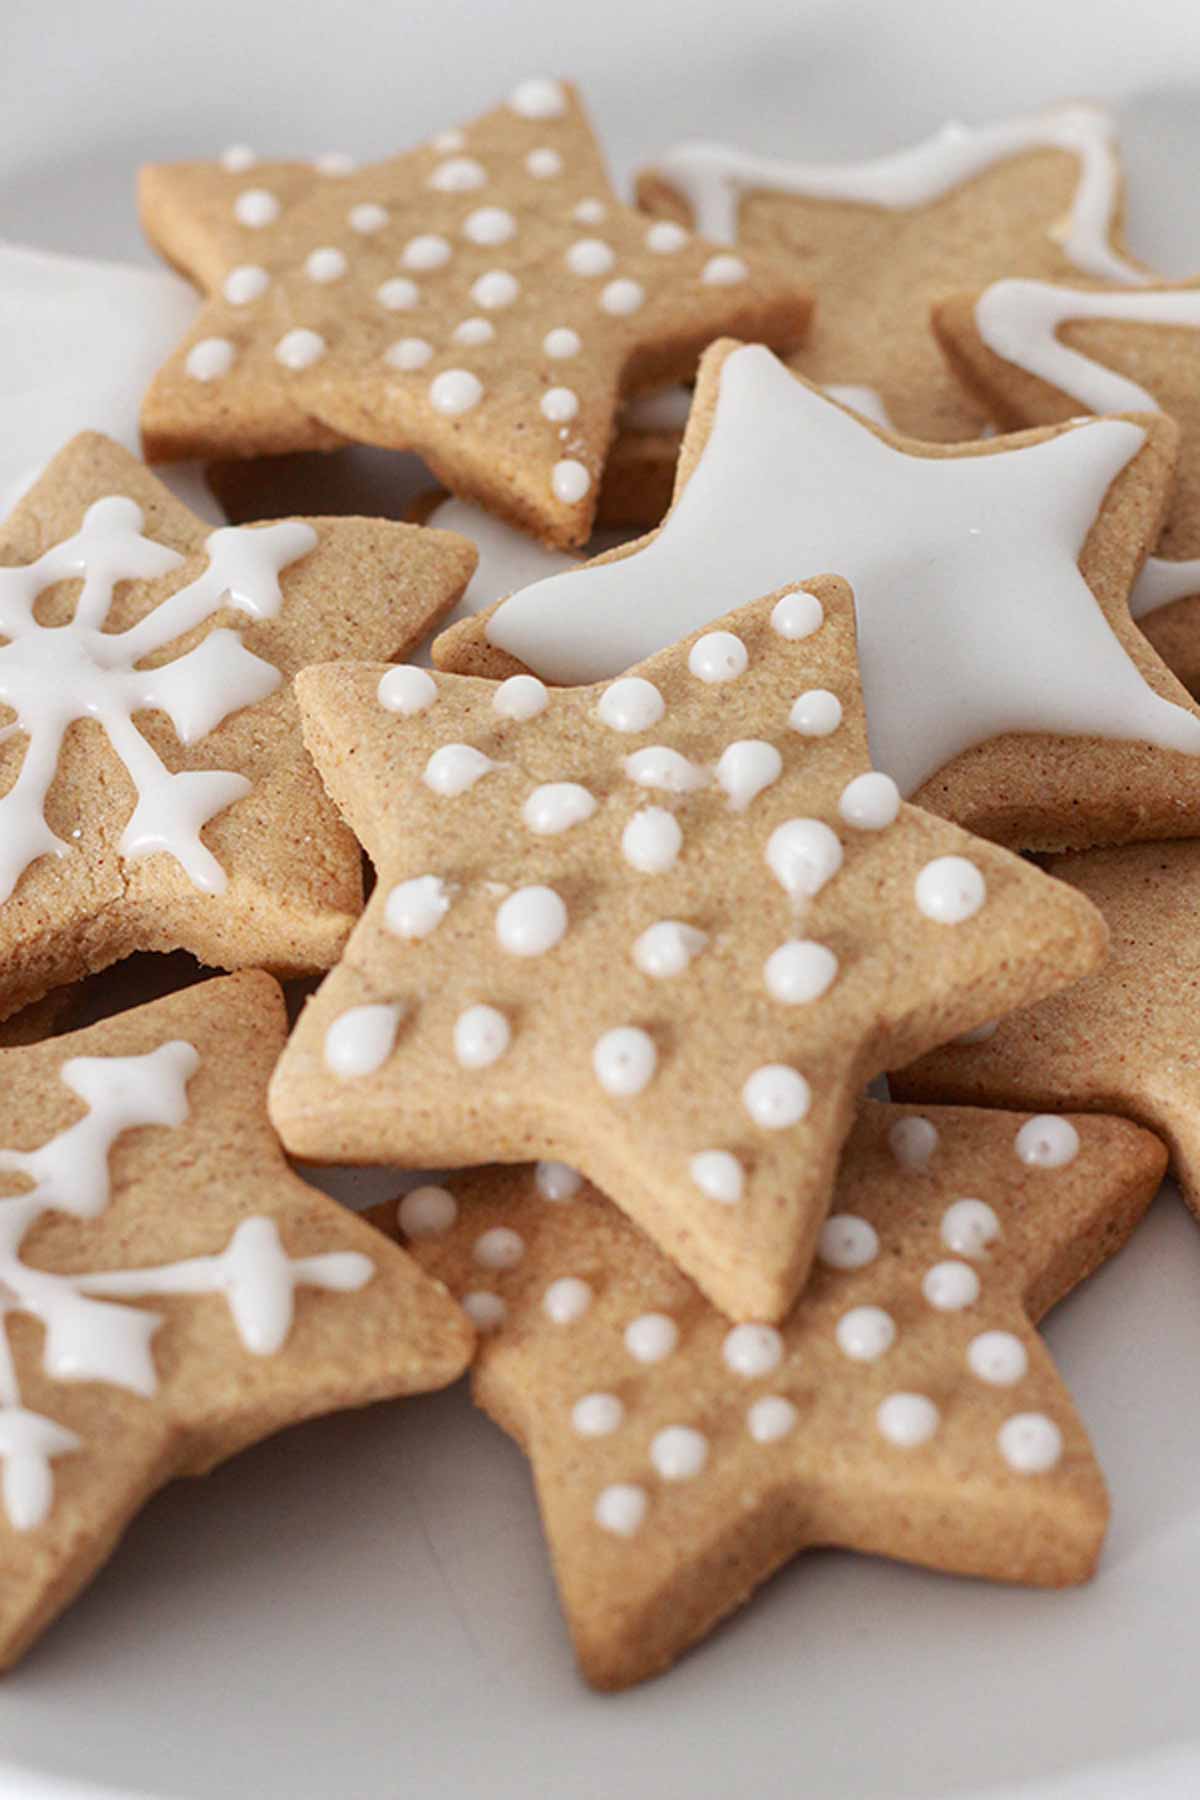 Star Shaped Gluten Free Christmas Spiced Biscuits